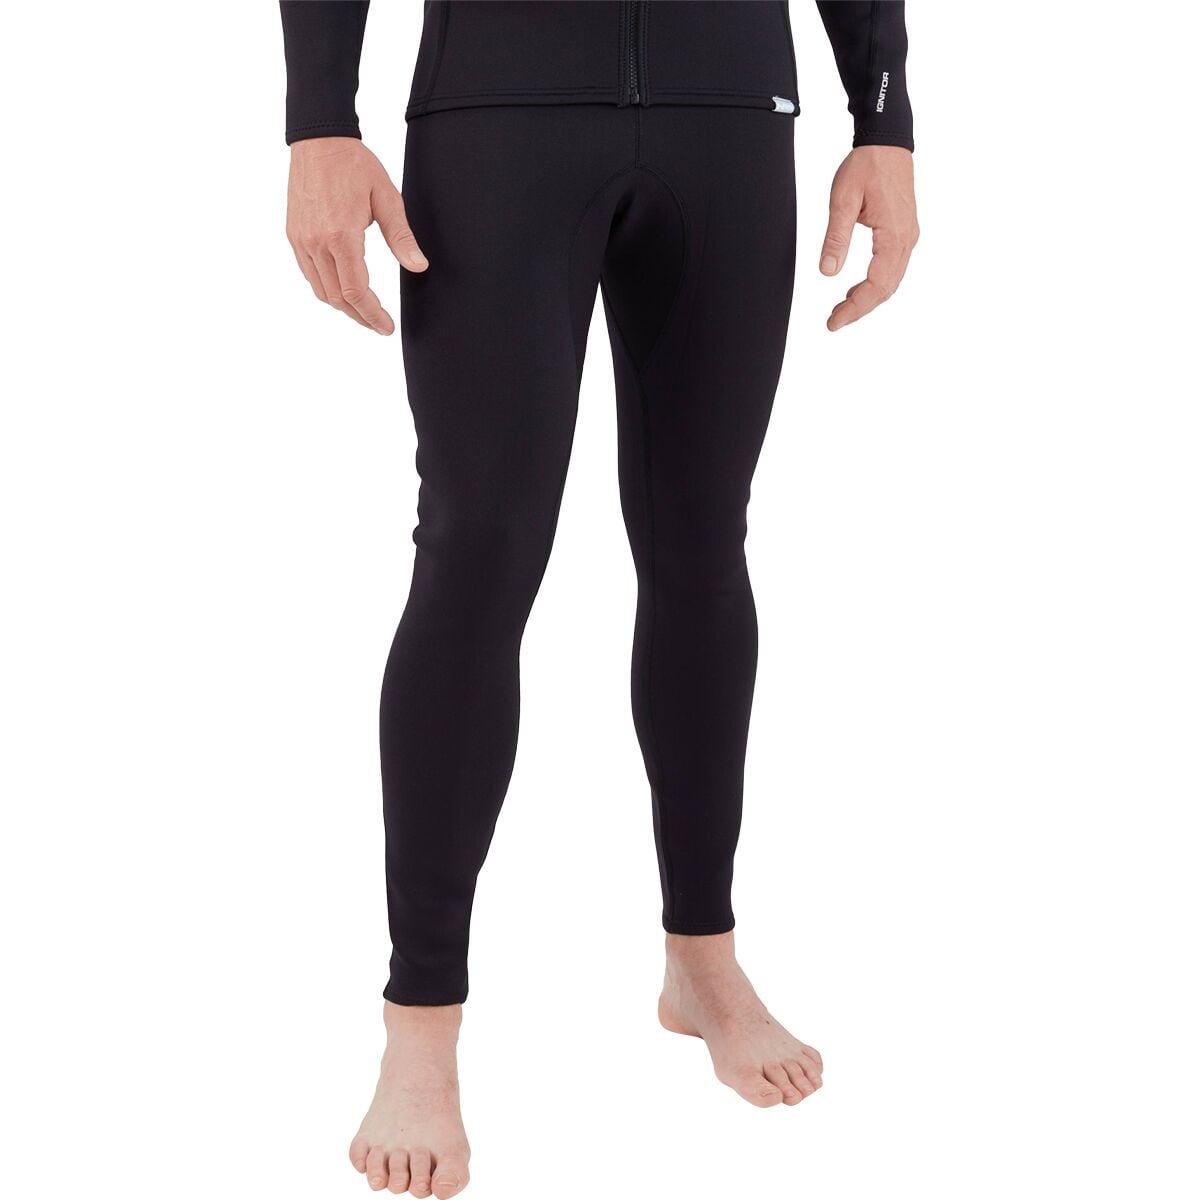 NRS Ignitor Pant - Men's